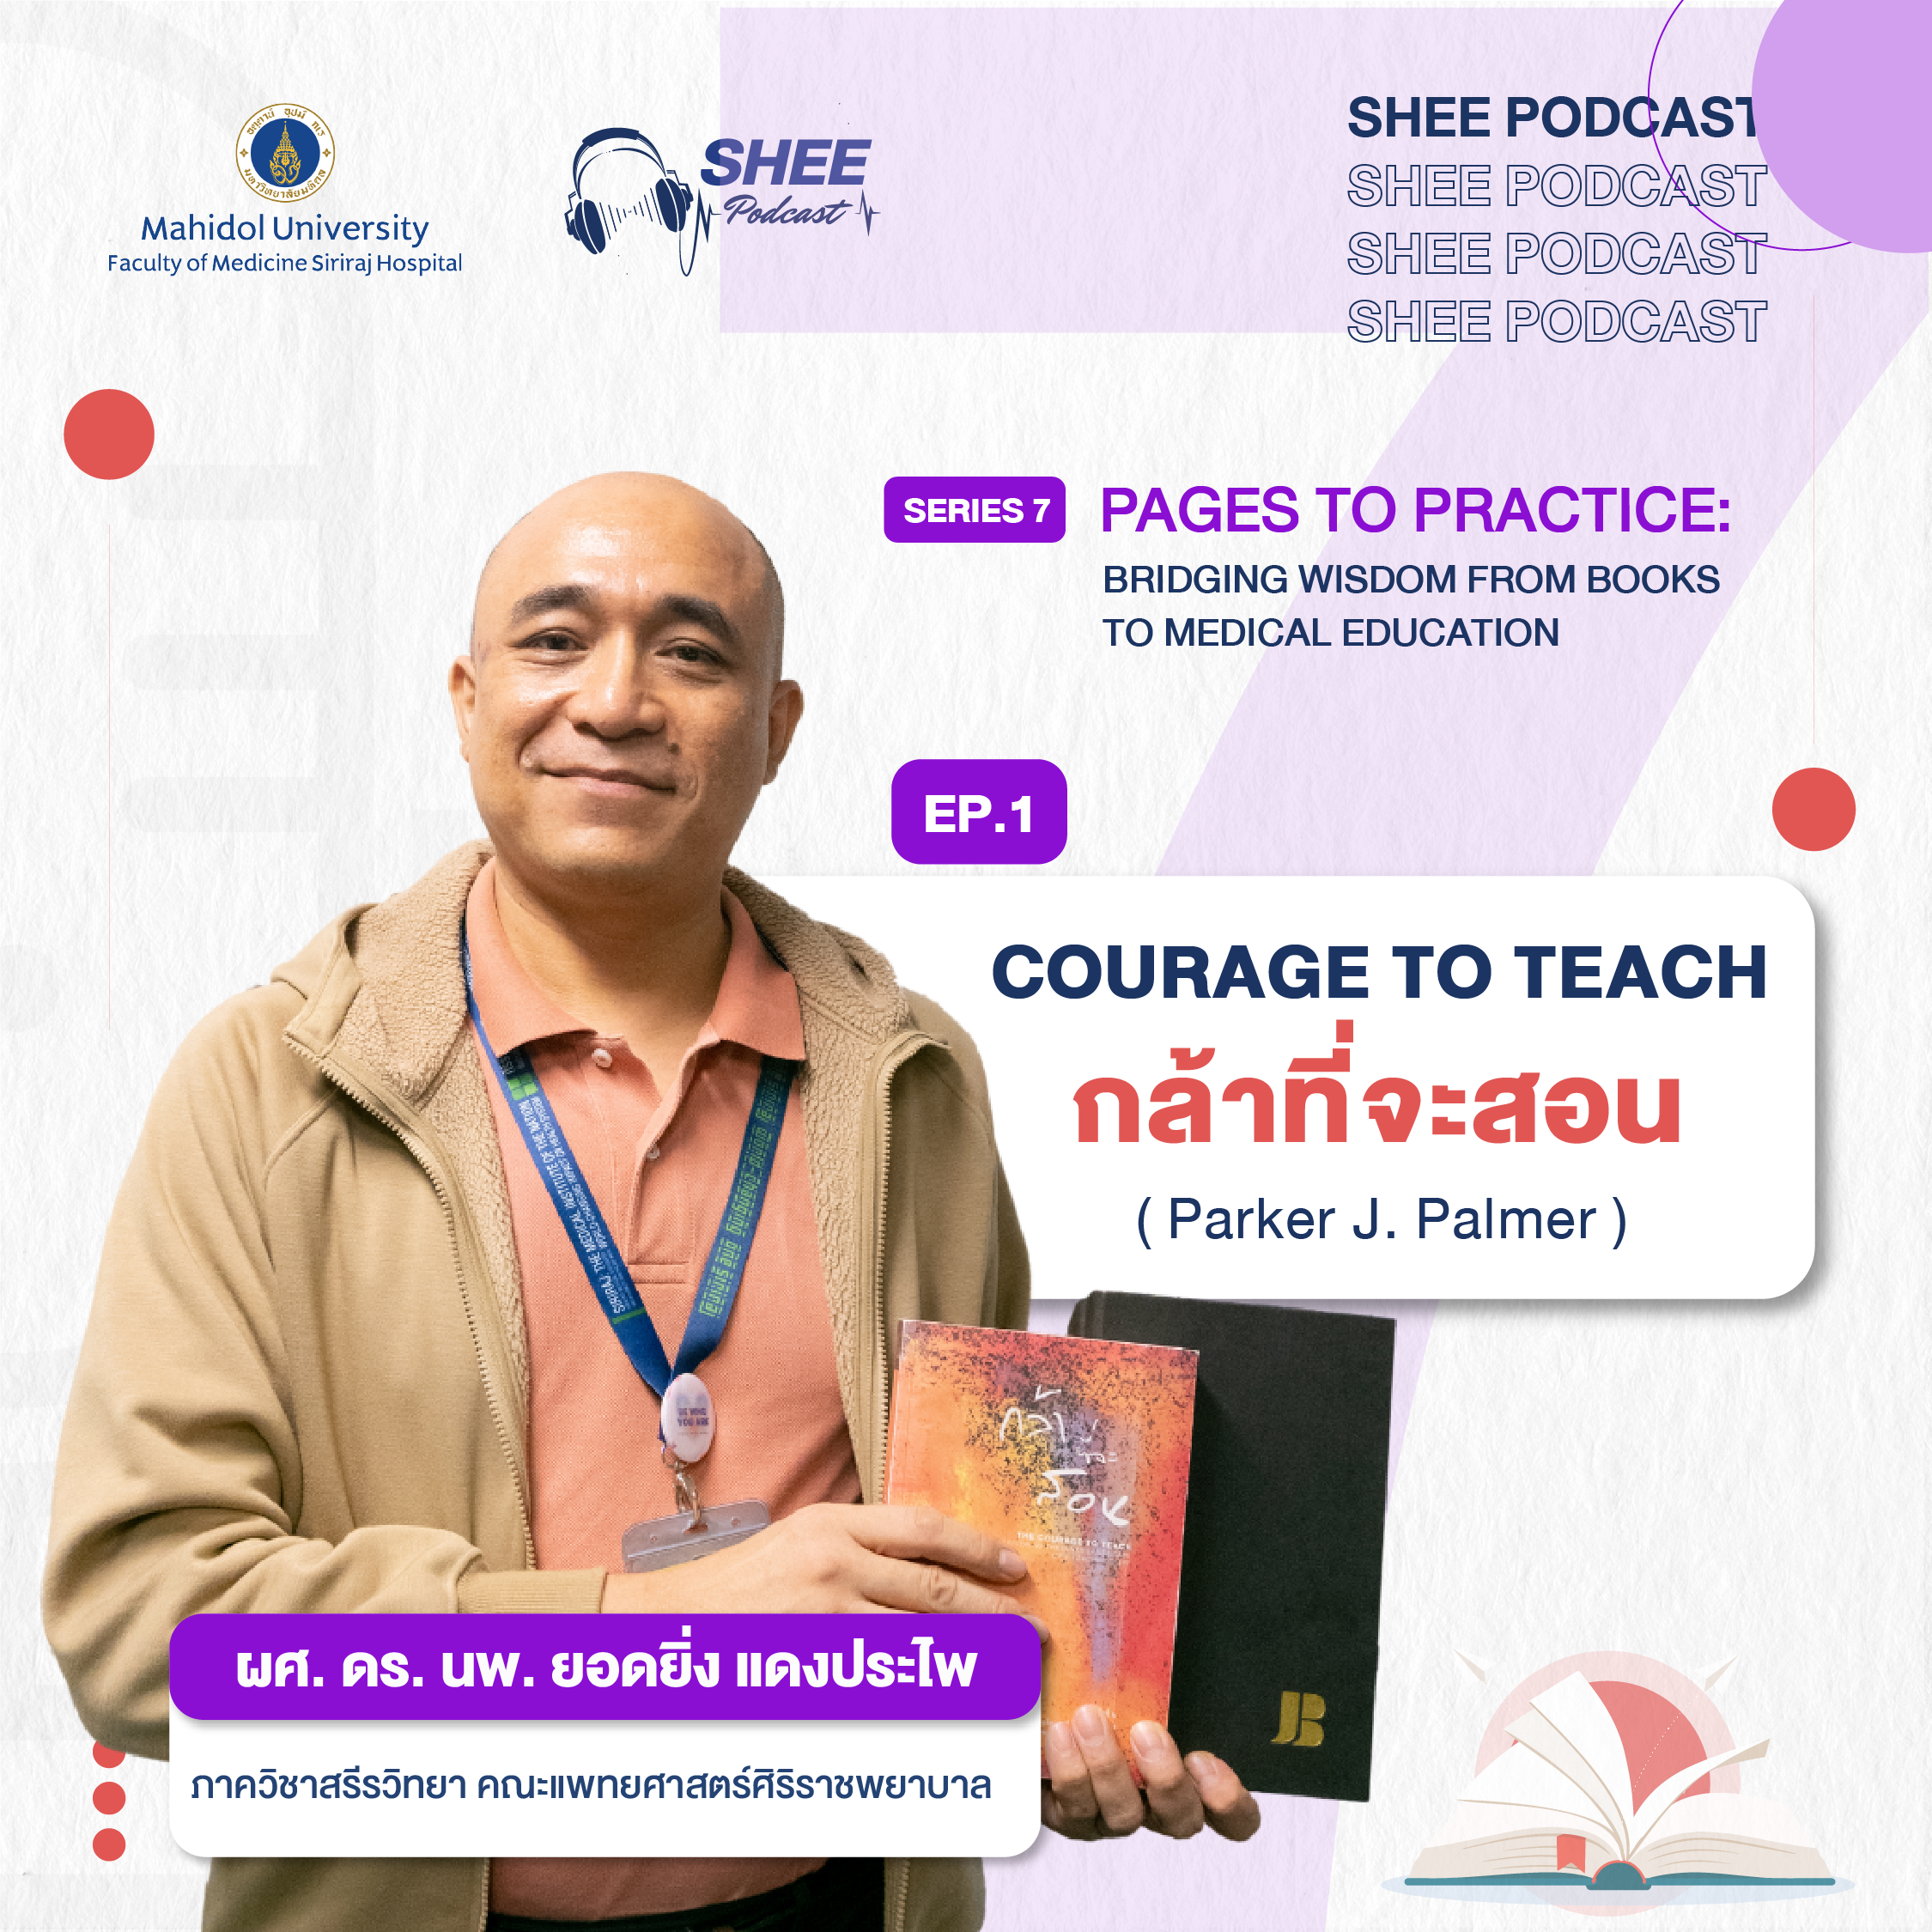 Episode 01 : Courage to teach by Parker J. Palmer